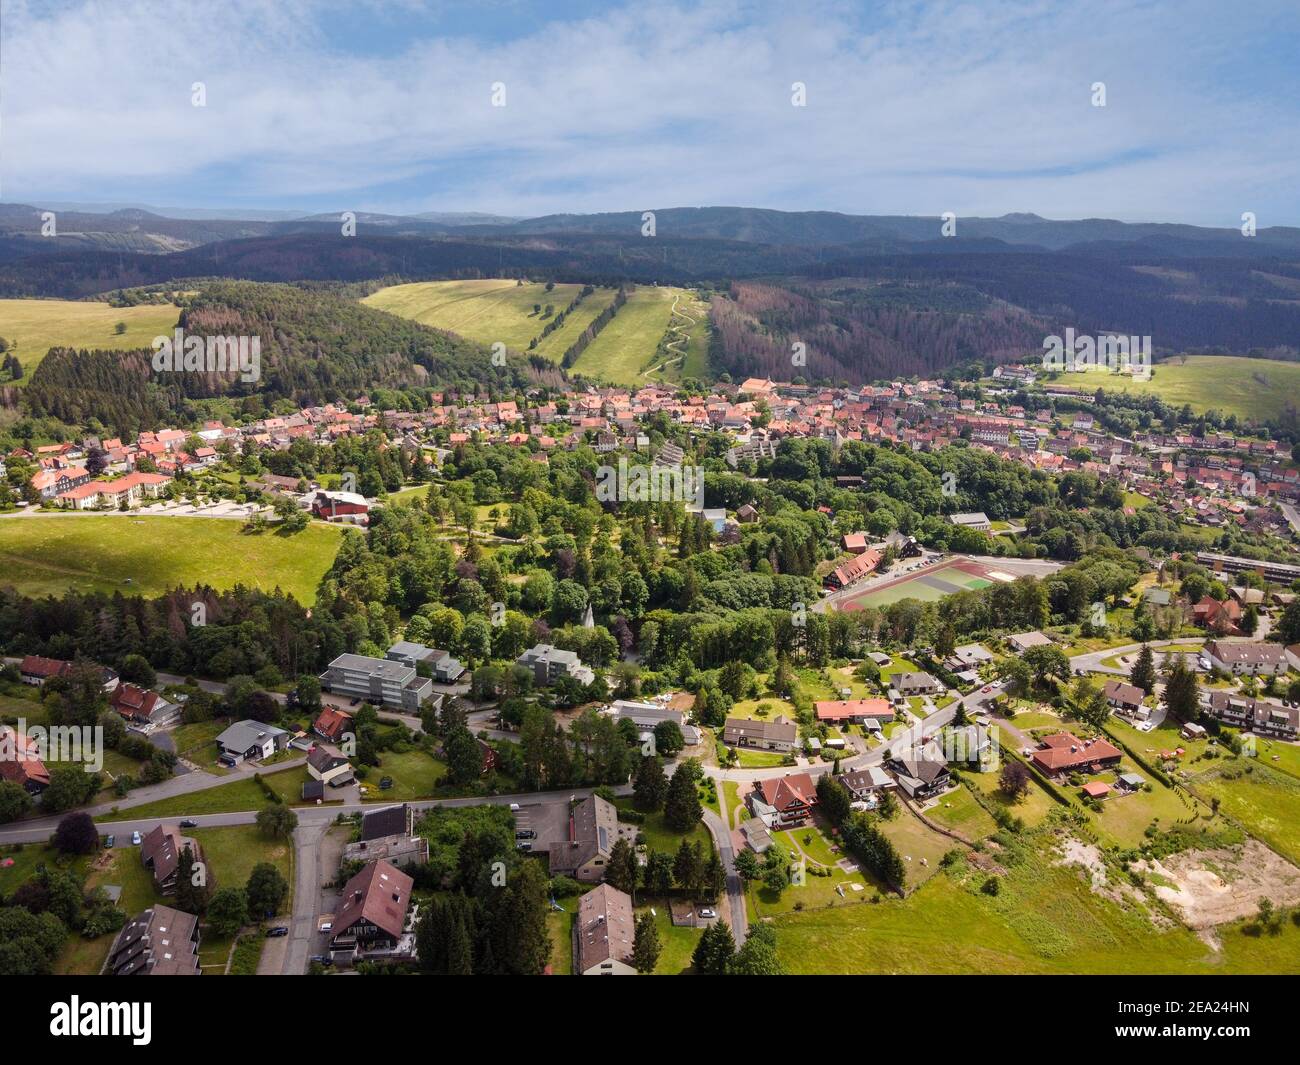 Aerial view of Sankt Andreasberg in the Harz mountains, Lower Saxony, Germany. Stock Photo